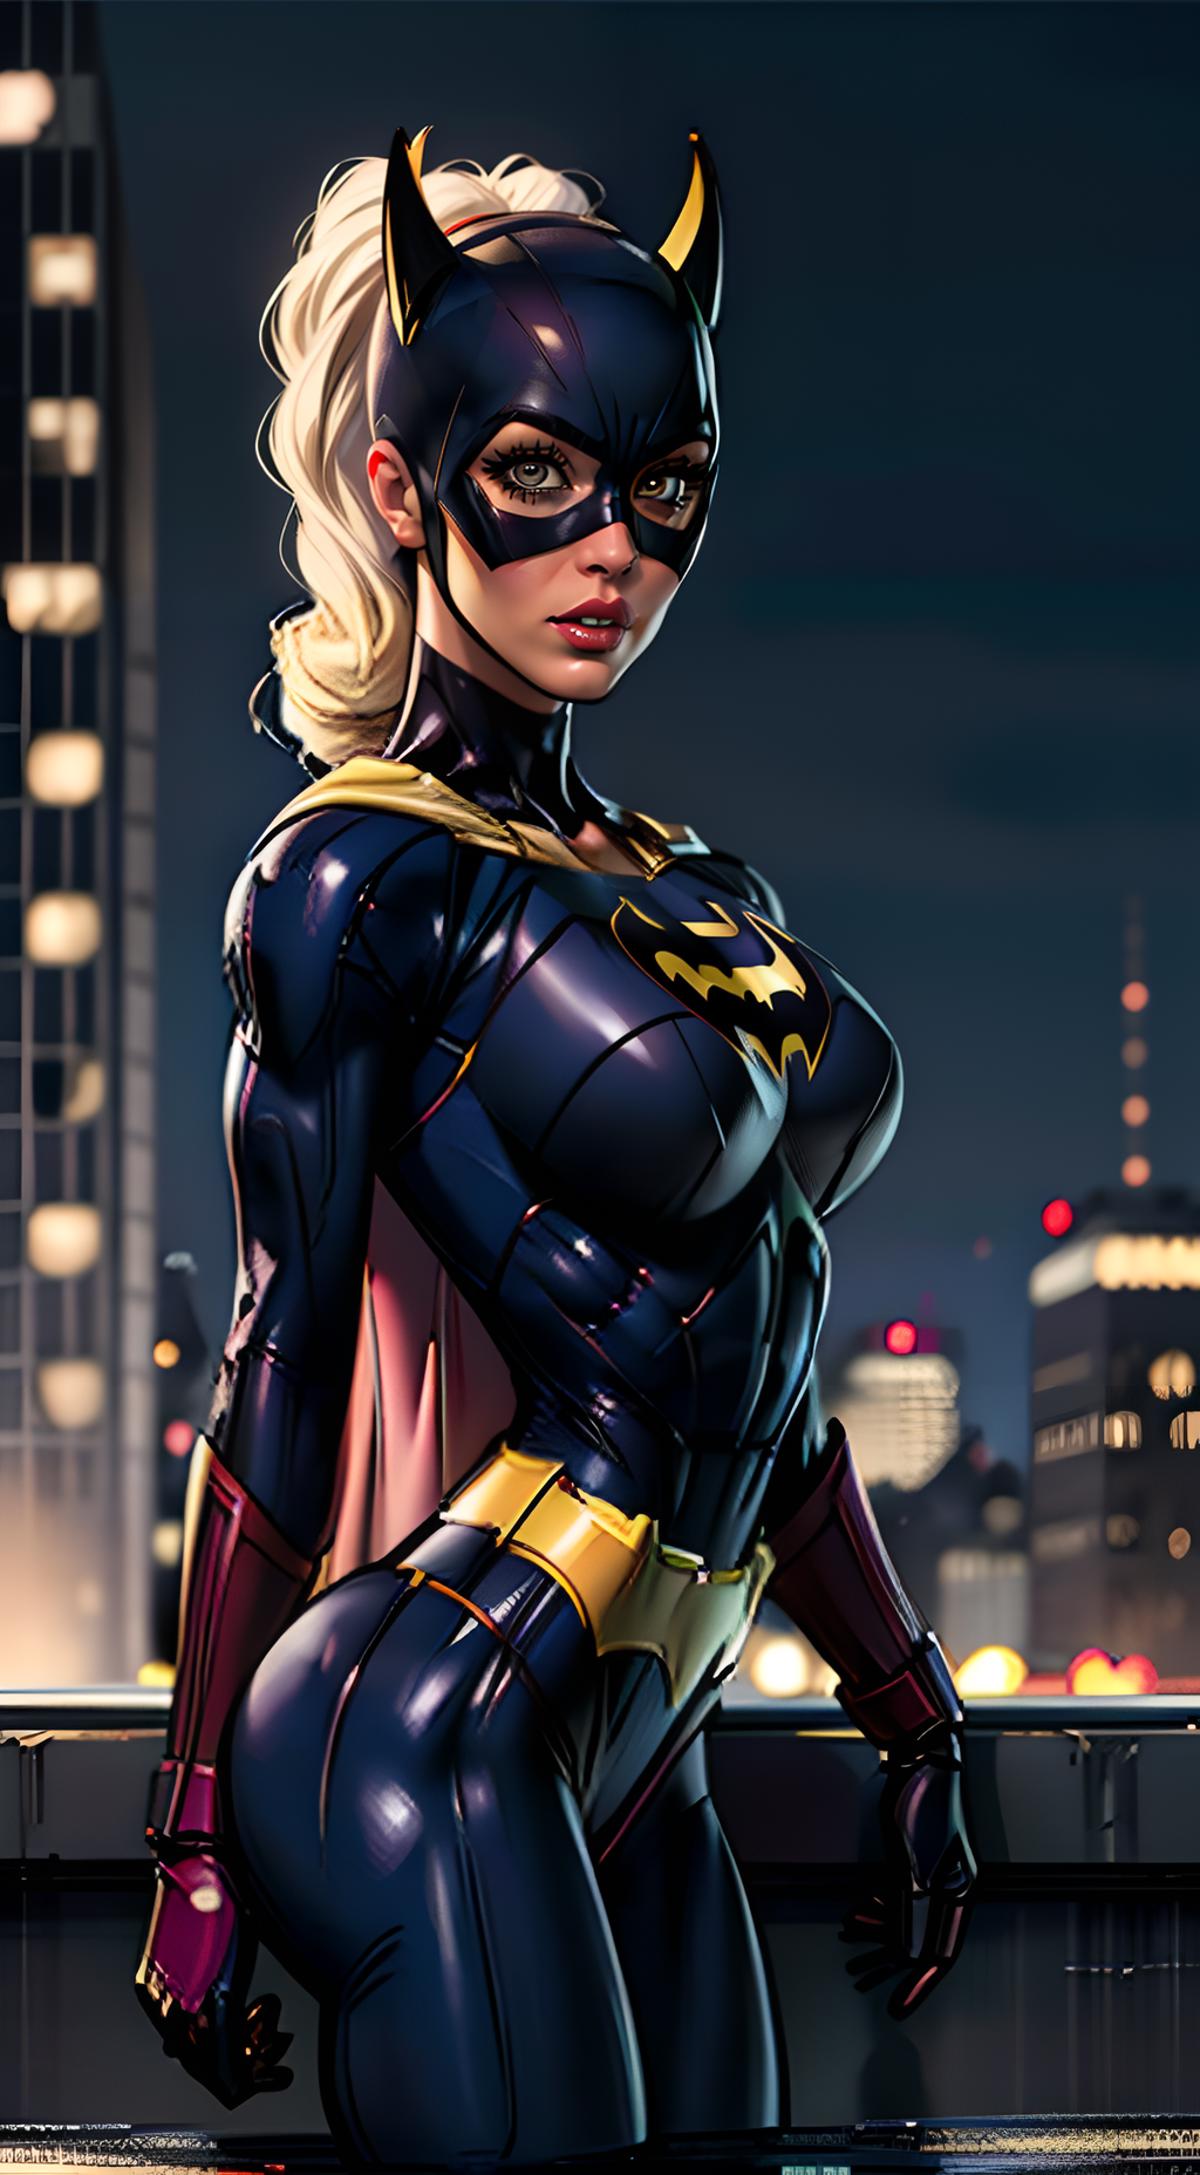 A comic book illustration of a female superhero in a blue and gold costume.